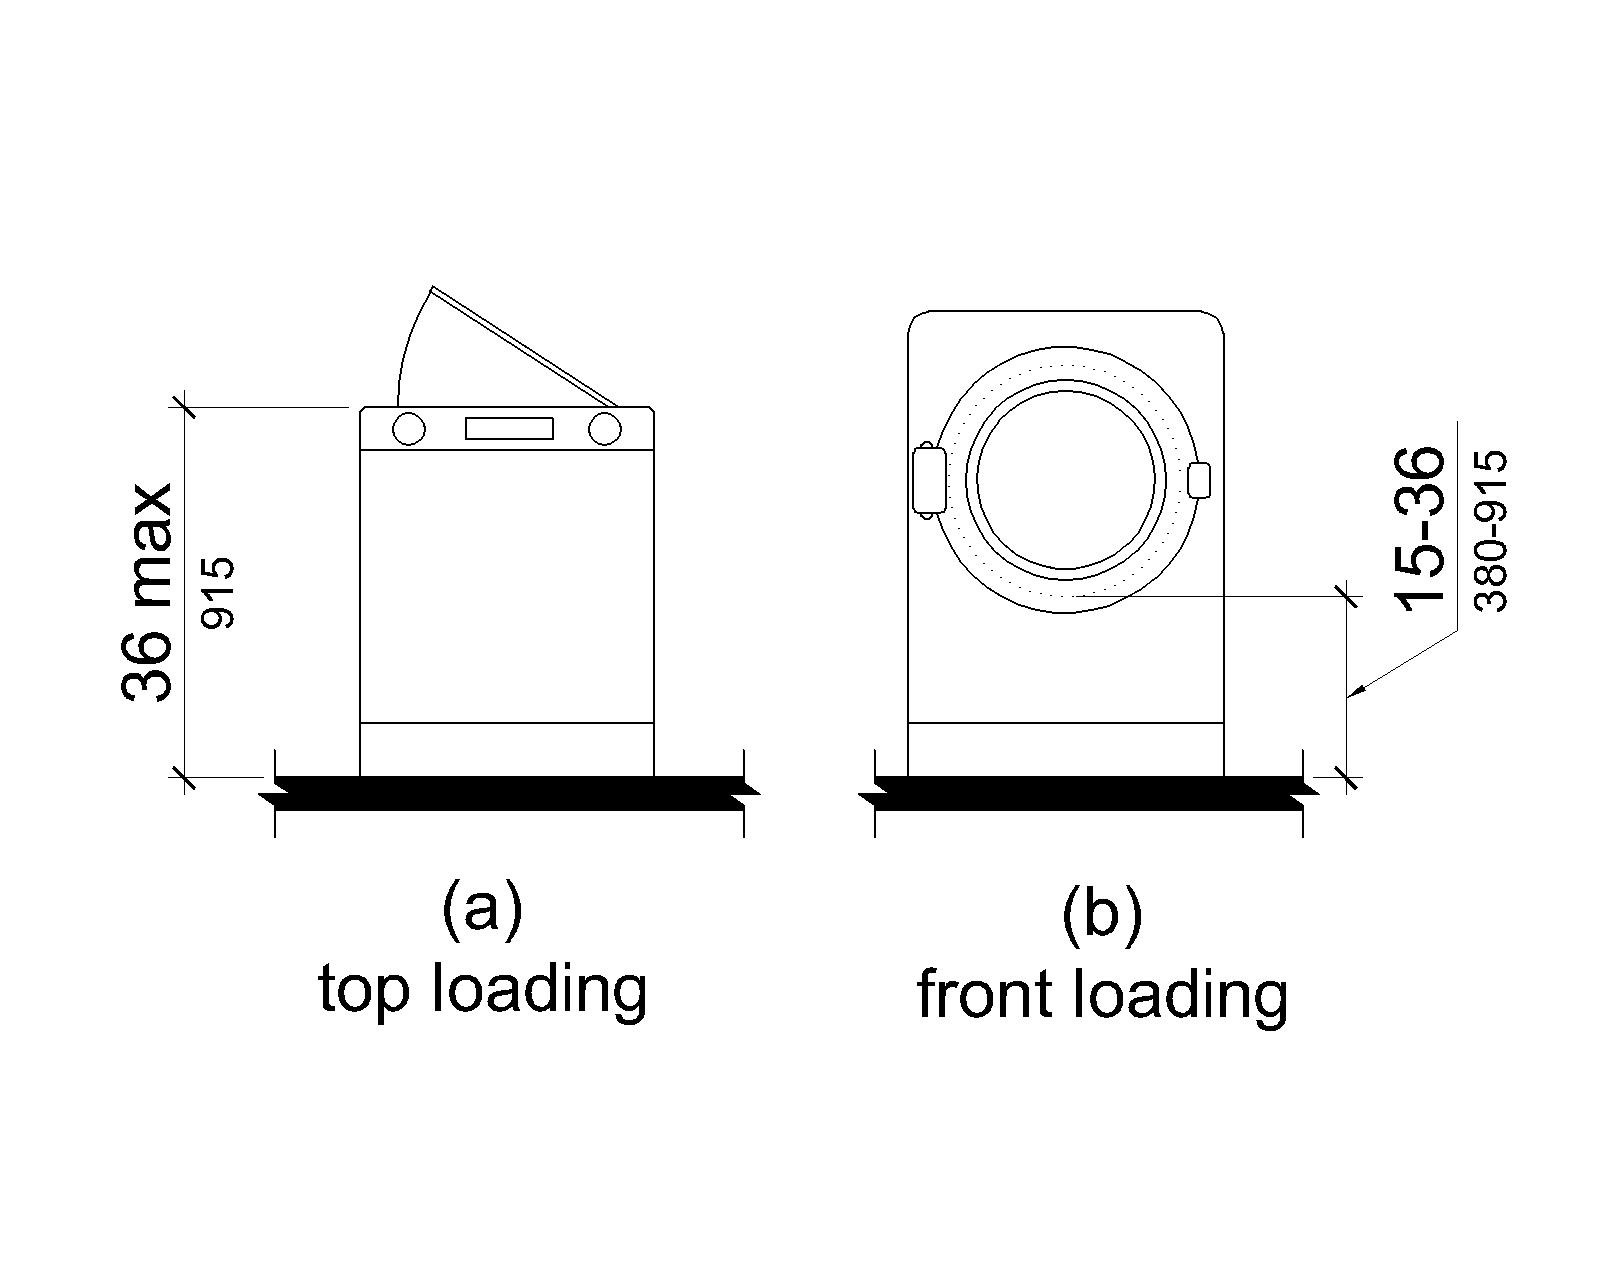 Figure (a) shows a top loading machine with the door to the laundry compartment 36 inches (915 mm) maximum above the deck surface. Figure (b) shows a front loading machine with the bottom of the opening to the laundry compartment 15 to 36 inches (380 to 915 mm) above the deck surface.